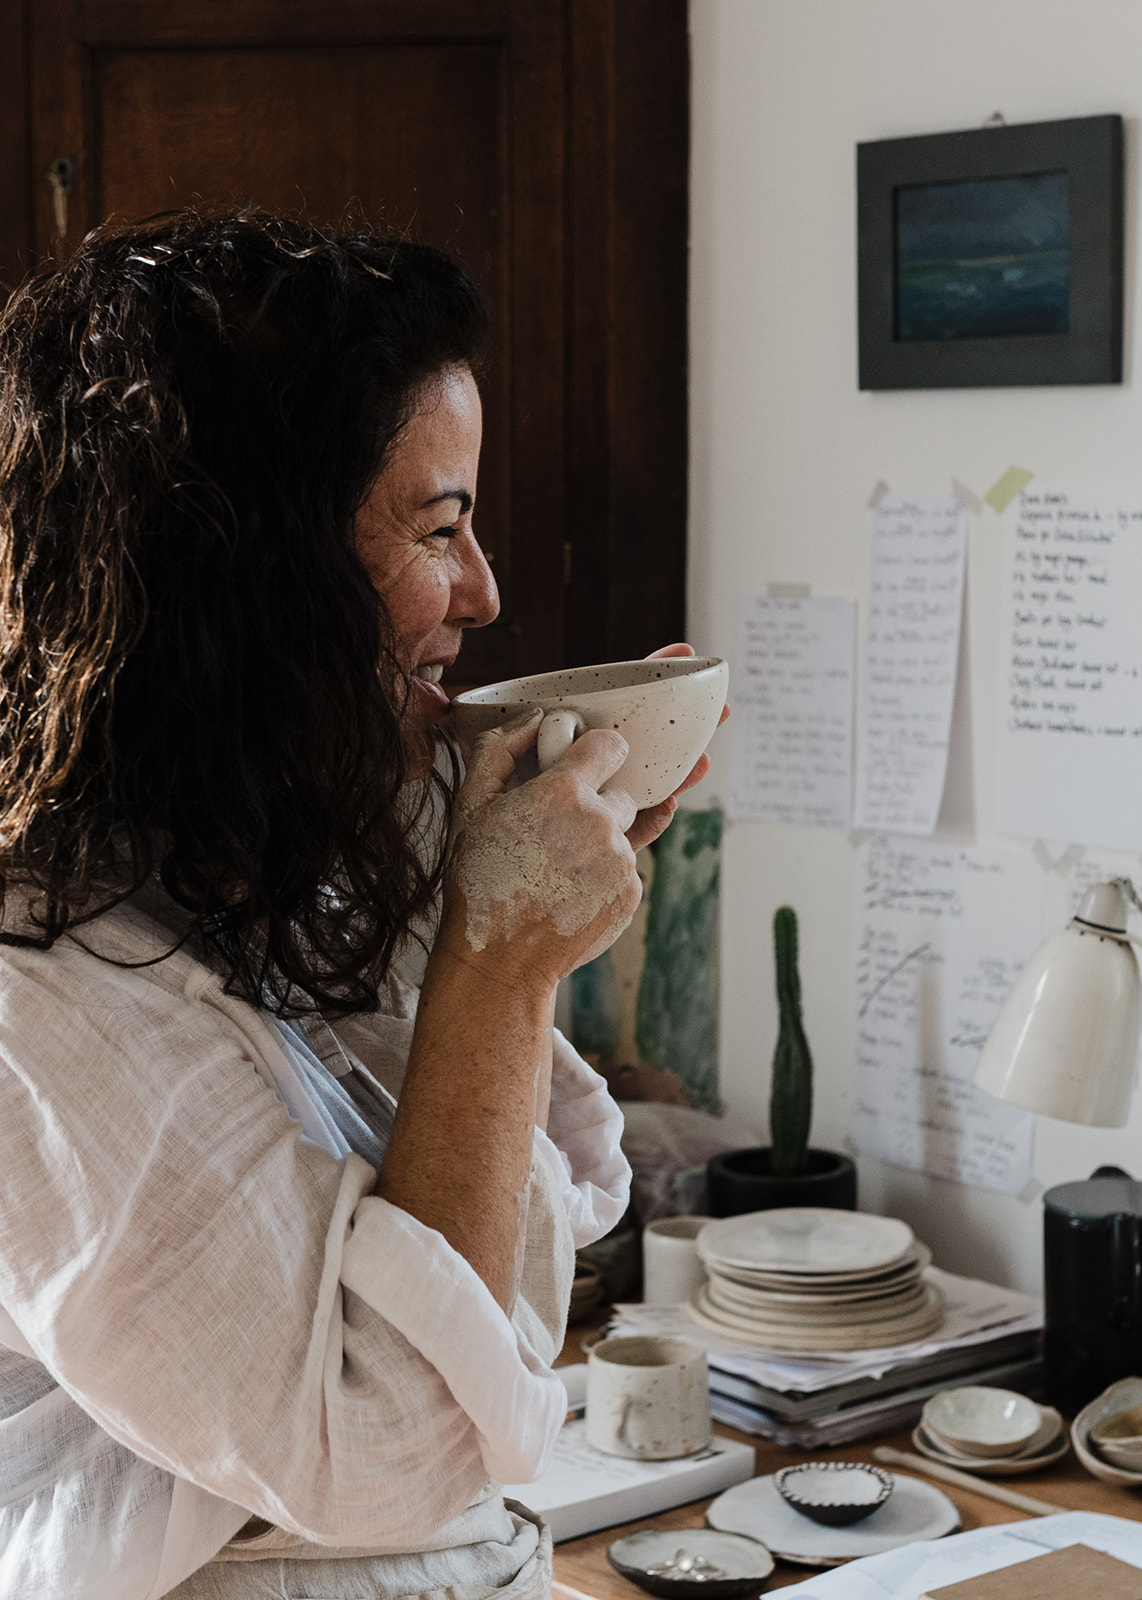 Portrait of woman drinking from a handmade pottery mug in her ceramics studio.